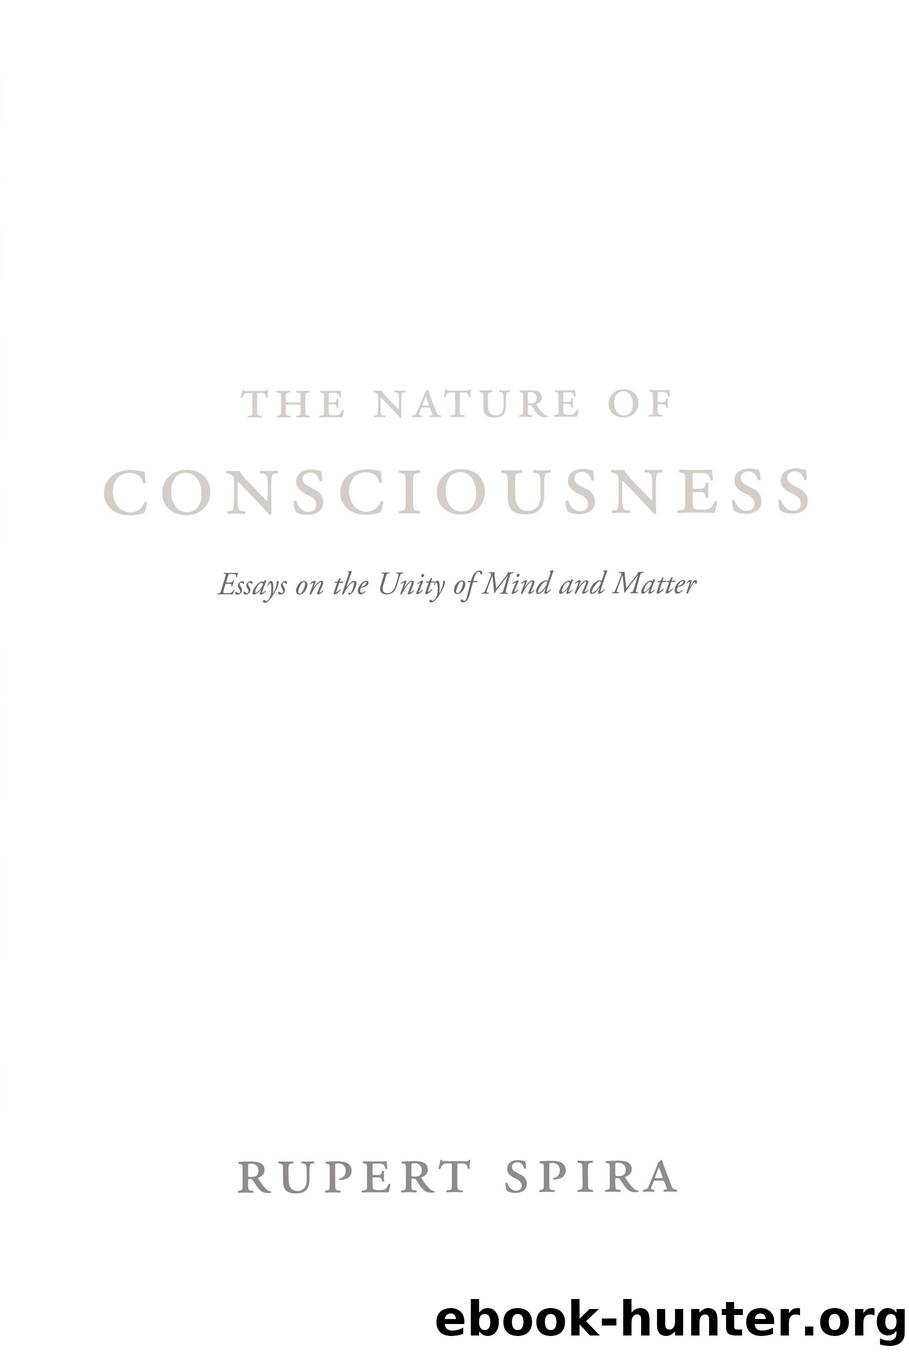 The Nature of Consciousness by Rupert Spira